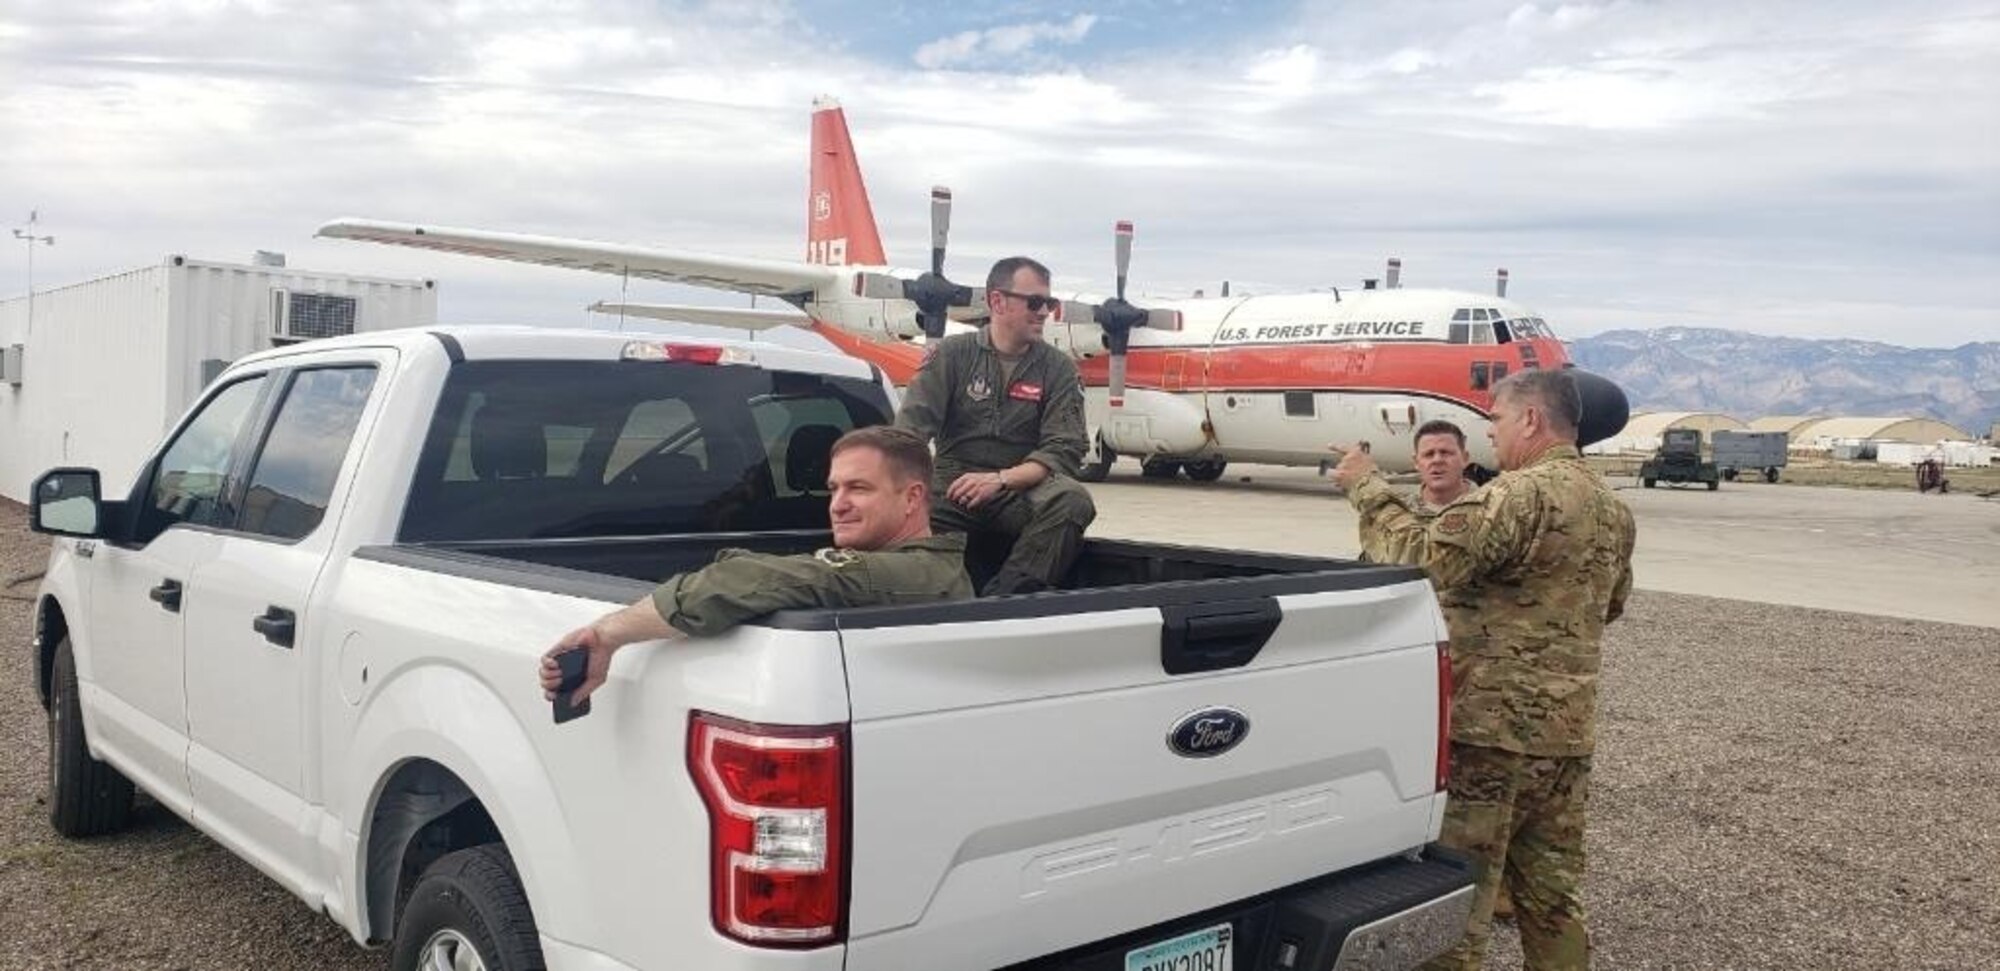 Aircrew sitting in and standing near the bed of a pickup truck.